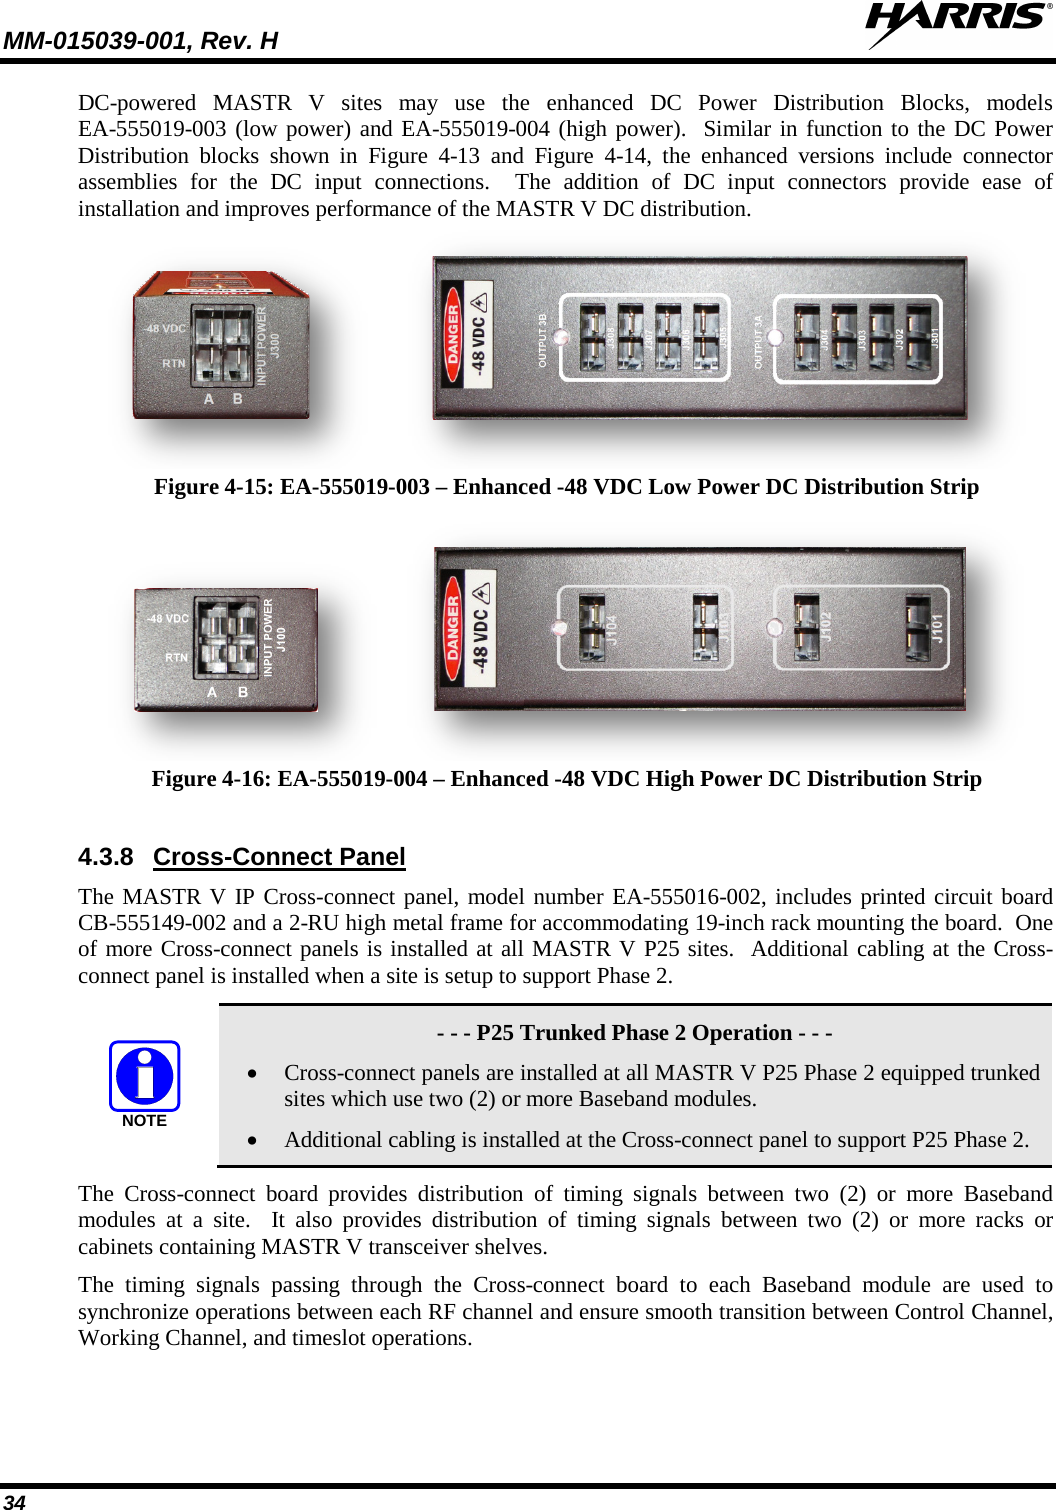 MM-015039-001, Rev. H     34 DC-powered MASTR V sites may  use the enhanced DC Power Distribution Blocks, models EA-555019-003 (low power) and EA-555019-004 (high power).  Similar in function to the DC Power Distribution blocks shown in Figure  4-13  and  Figure  4-14, the enhanced versions include connector assemblies for the DC input connections.  The addition of DC input connectors provide ease of installation and improves performance of the MASTR V DC distribution.    Figure 4-15: EA-555019-003 – Enhanced -48 VDC Low Power DC Distribution Strip     Figure 4-16: EA-555019-004 – Enhanced -48 VDC High Power DC Distribution Strip  4.3.8 Cross-Connect Panel The MASTR V IP Cross-connect panel, model number EA-555016-002, includes printed circuit board CB-555149-002 and a 2-RU high metal frame for accommodating 19-inch rack mounting the board.  One of more Cross-connect panels is installed at all MASTR V P25 sites.  Additional cabling at the Cross-connect panel is installed when a site is setup to support Phase 2.     - - - P25 Trunked Phase 2 Operation - - - • Cross-connect panels are installed at all MASTR V P25 Phase 2 equipped trunked sites which use two (2) or more Baseband modules. • Additional cabling is installed at the Cross-connect panel to support P25 Phase 2. The Cross-connect board provides distribution of timing signals between two (2) or more Baseband modules at a site.  It also provides distribution of timing signals between two (2) or more racks or cabinets containing MASTR V transceiver shelves.   The timing signals passing through the Cross-connect board to each Baseband module are used to synchronize operations between each RF channel and ensure smooth transition between Control Channel, Working Channel, and timeslot operations.  NOTE